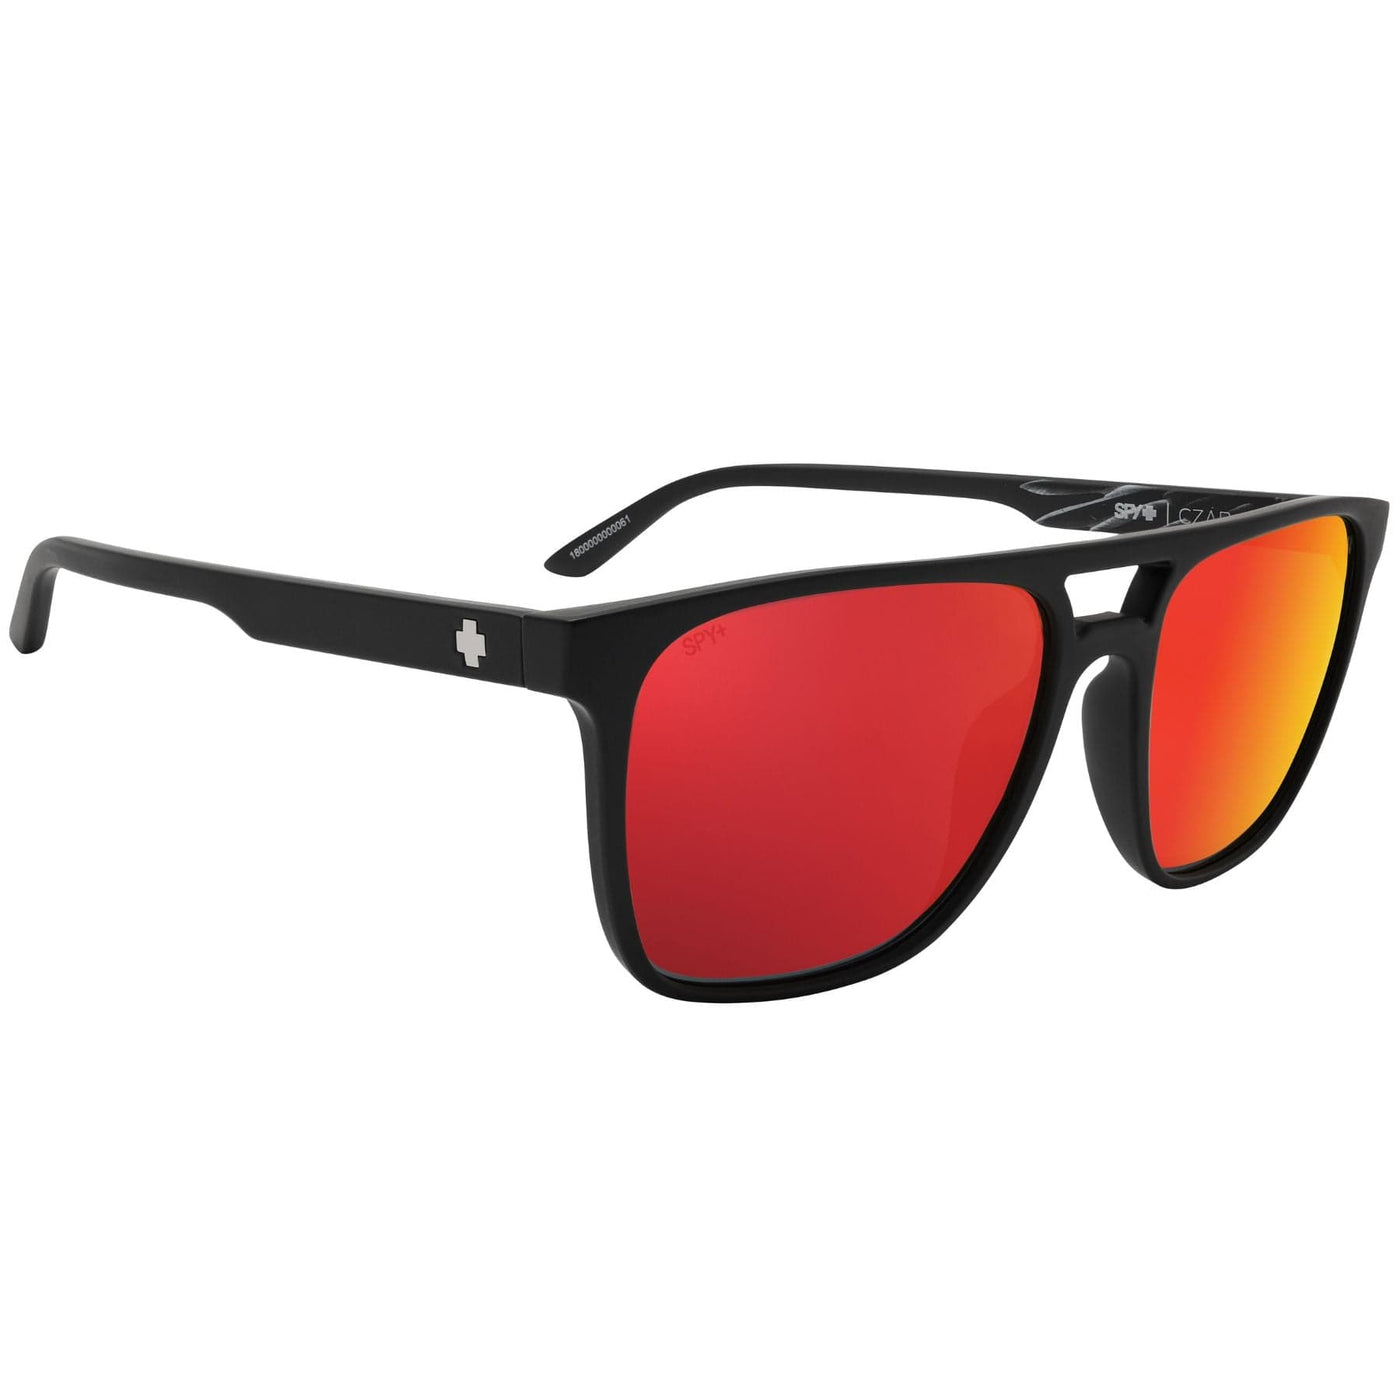 SPY CZAR Sunglasses, Happy Lens - Red 8Lines Shop - Fast Shipping